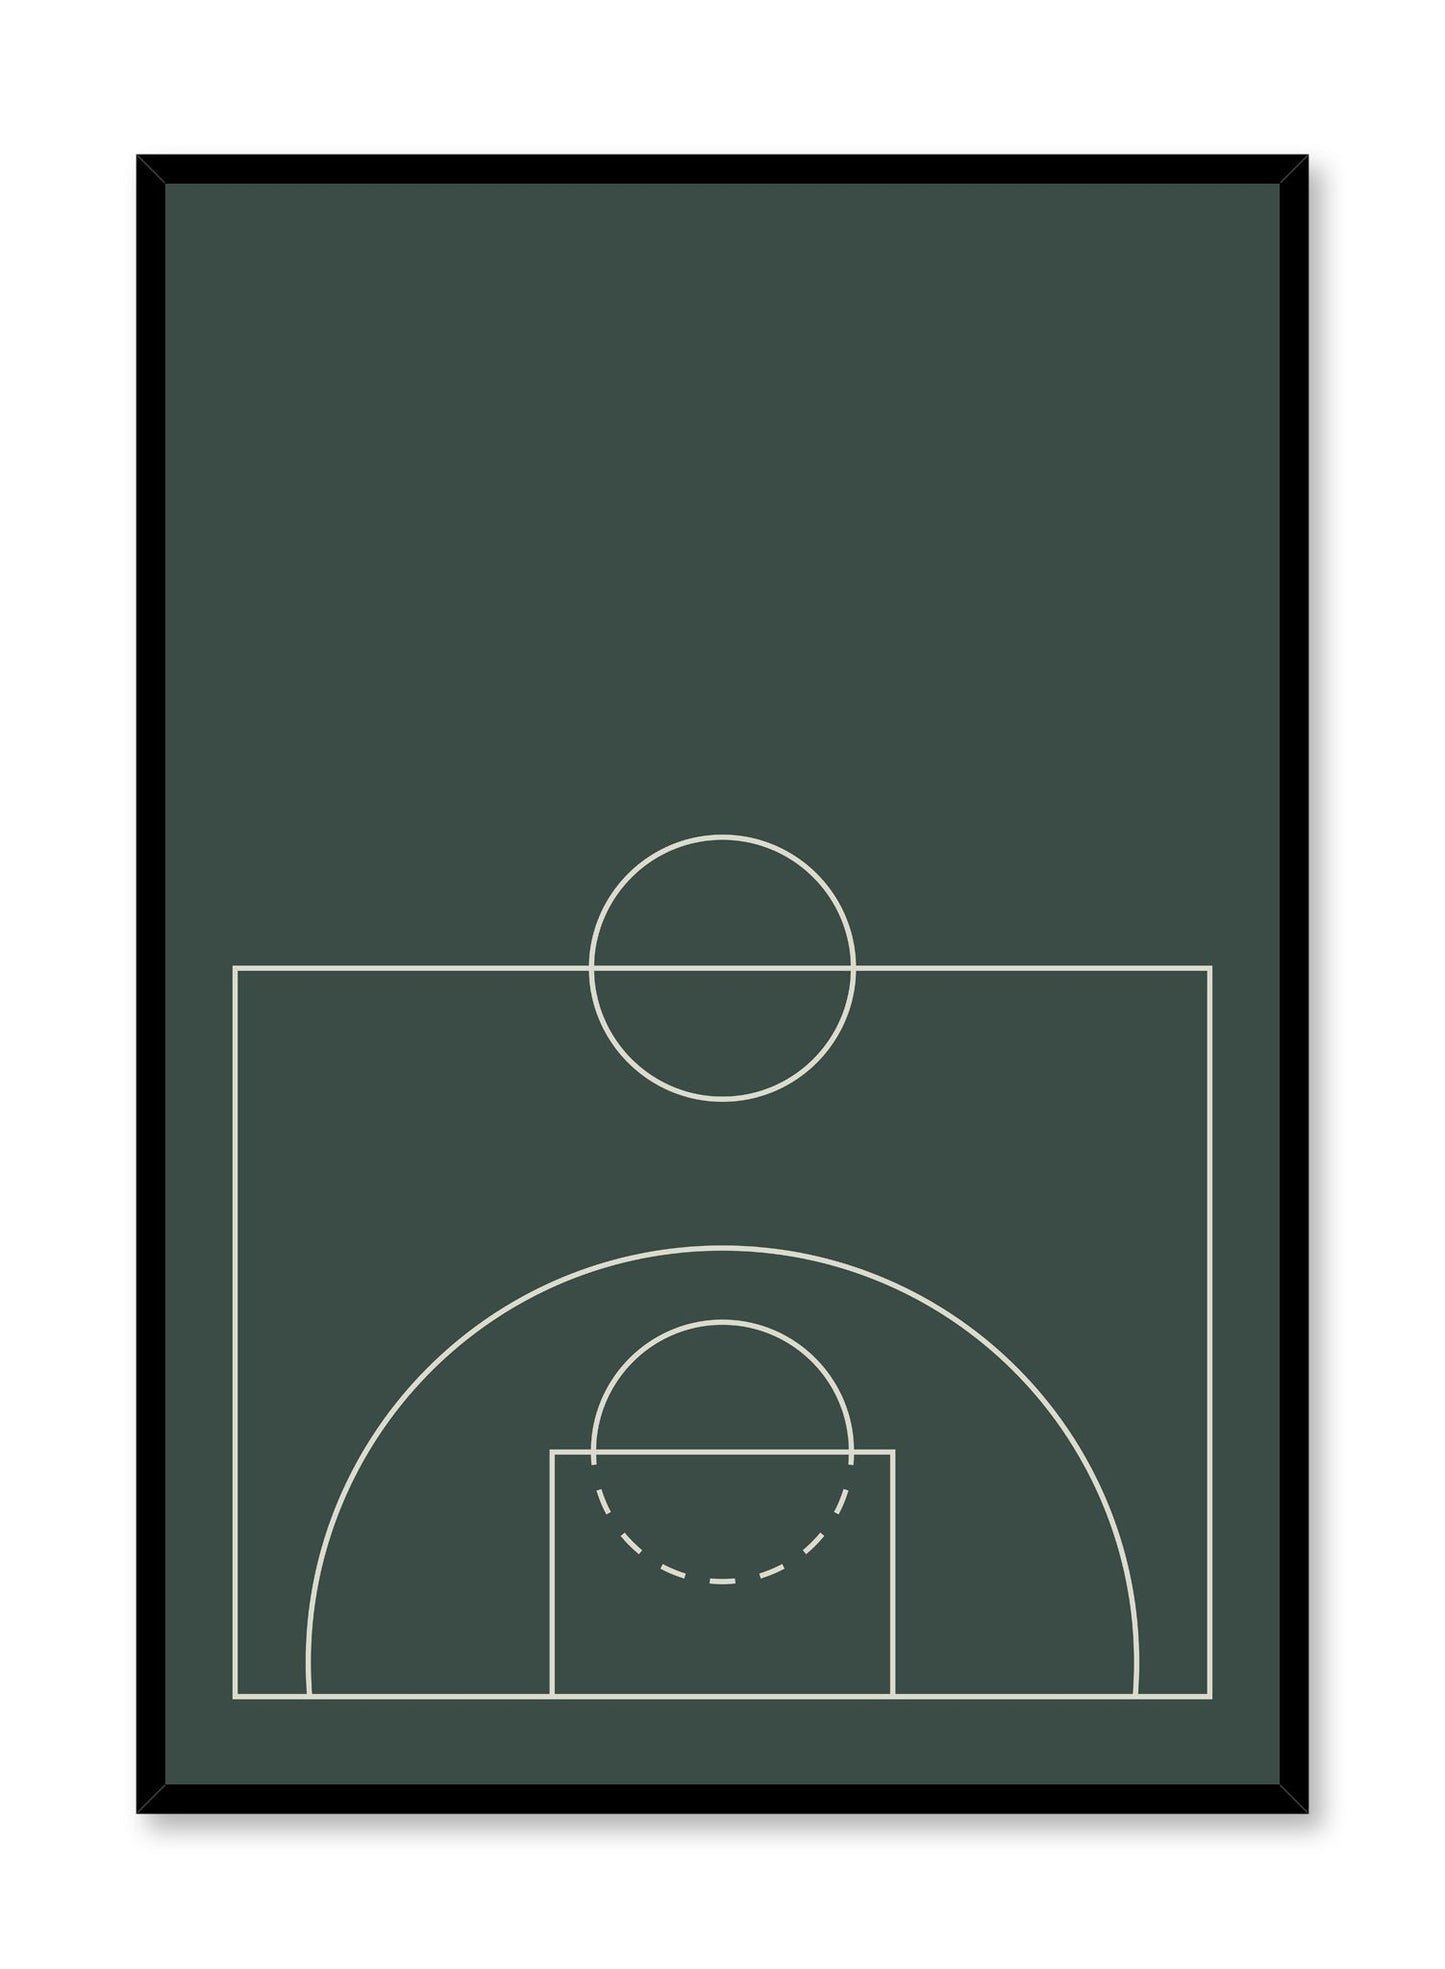 Minimalist design poster by Opposite Wall with Free-Throw abstract graphic design of basketball court in green